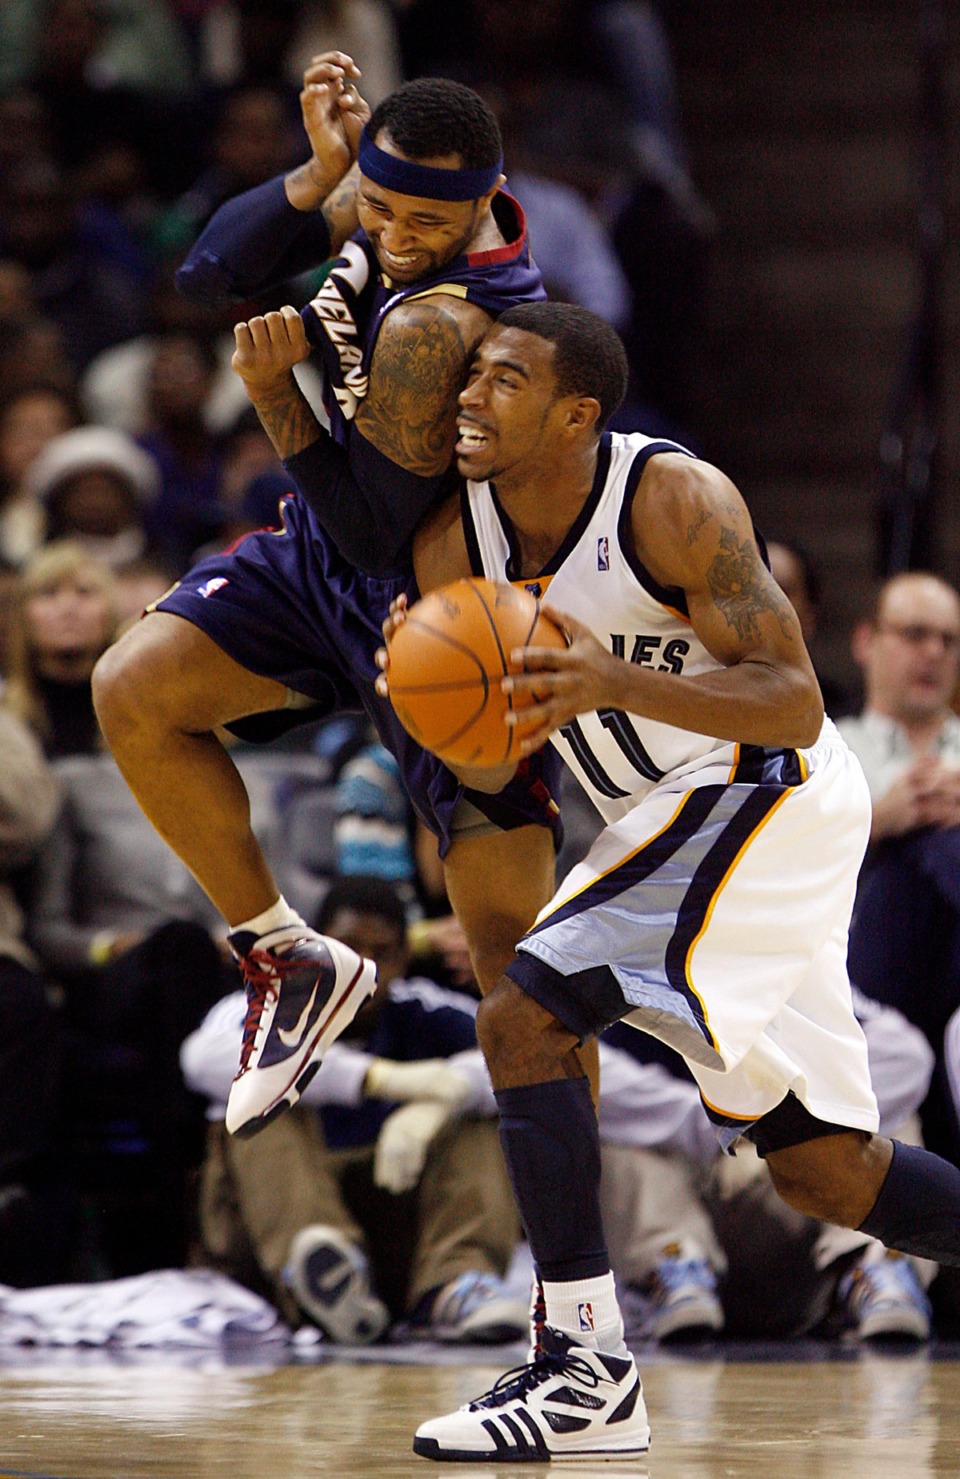 <strong>Cleveland Cavaliers guard Mo Williams, left, fouls Memphis Grizzlies guard Mike Conley (11) during a game Dec. 8, 2009, in Memphis. The Grizzlies won 111-109 in overtime.</strong> (AP Photo/Lance Murphey file)